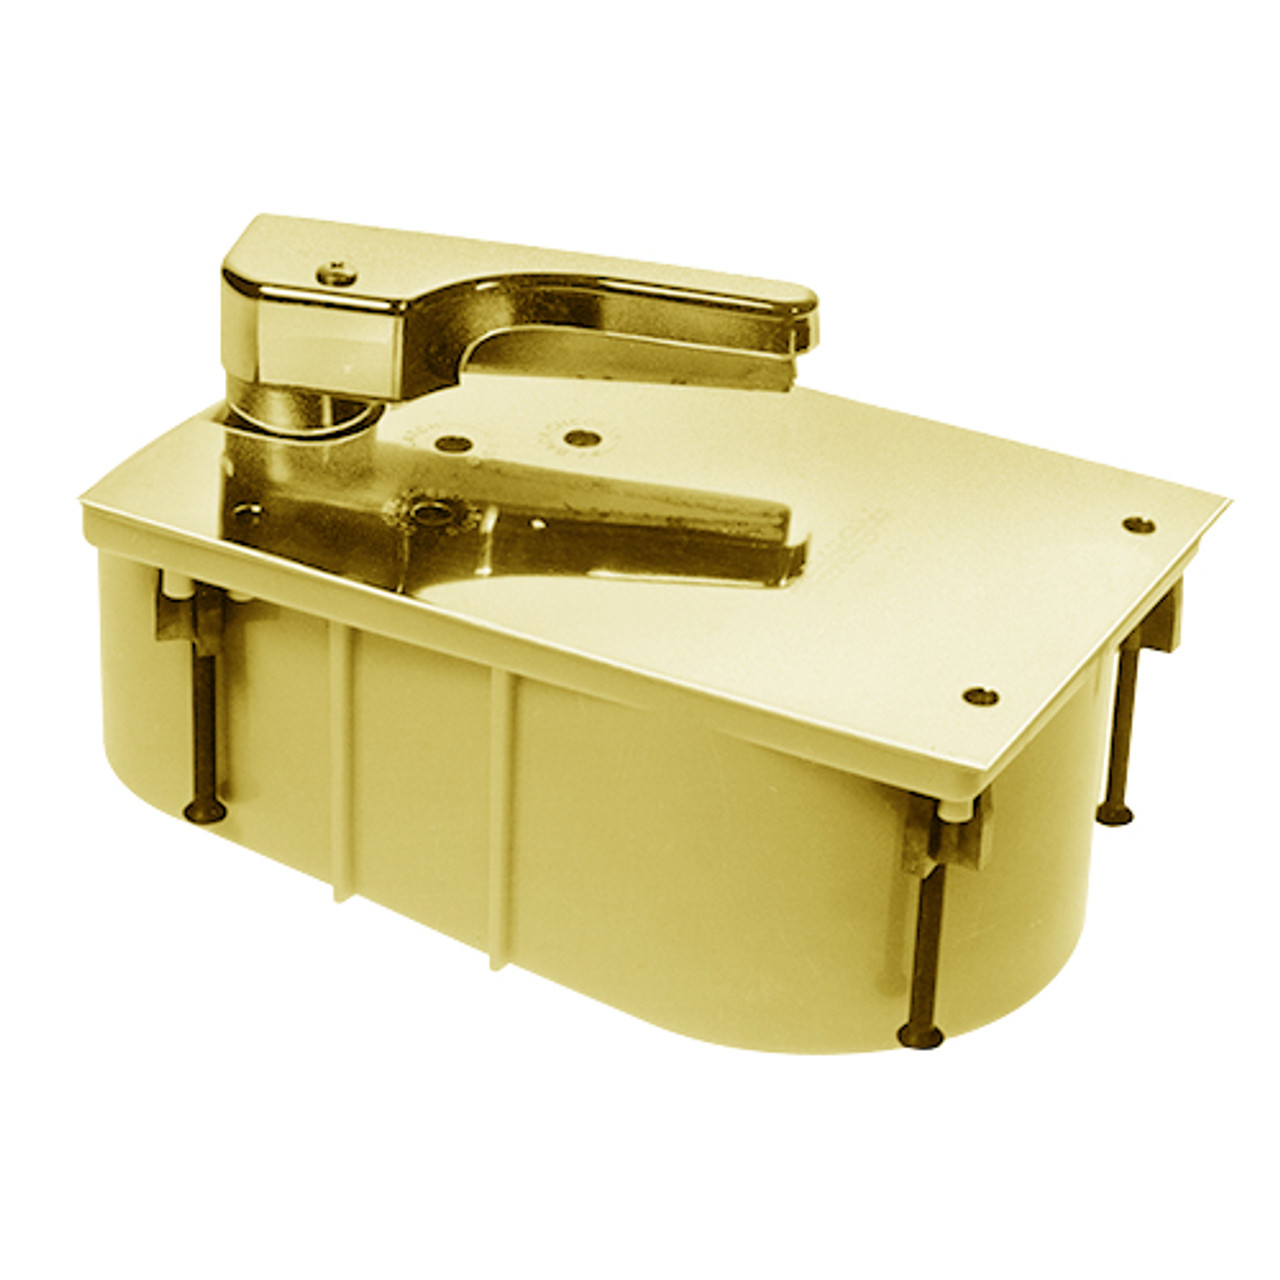 PHHM27-90N-RH-605 Rixson 27 Series Heavy Duty Offset Hung Floor Closer with HM Door and Frame Preps in Bright Brass Finish